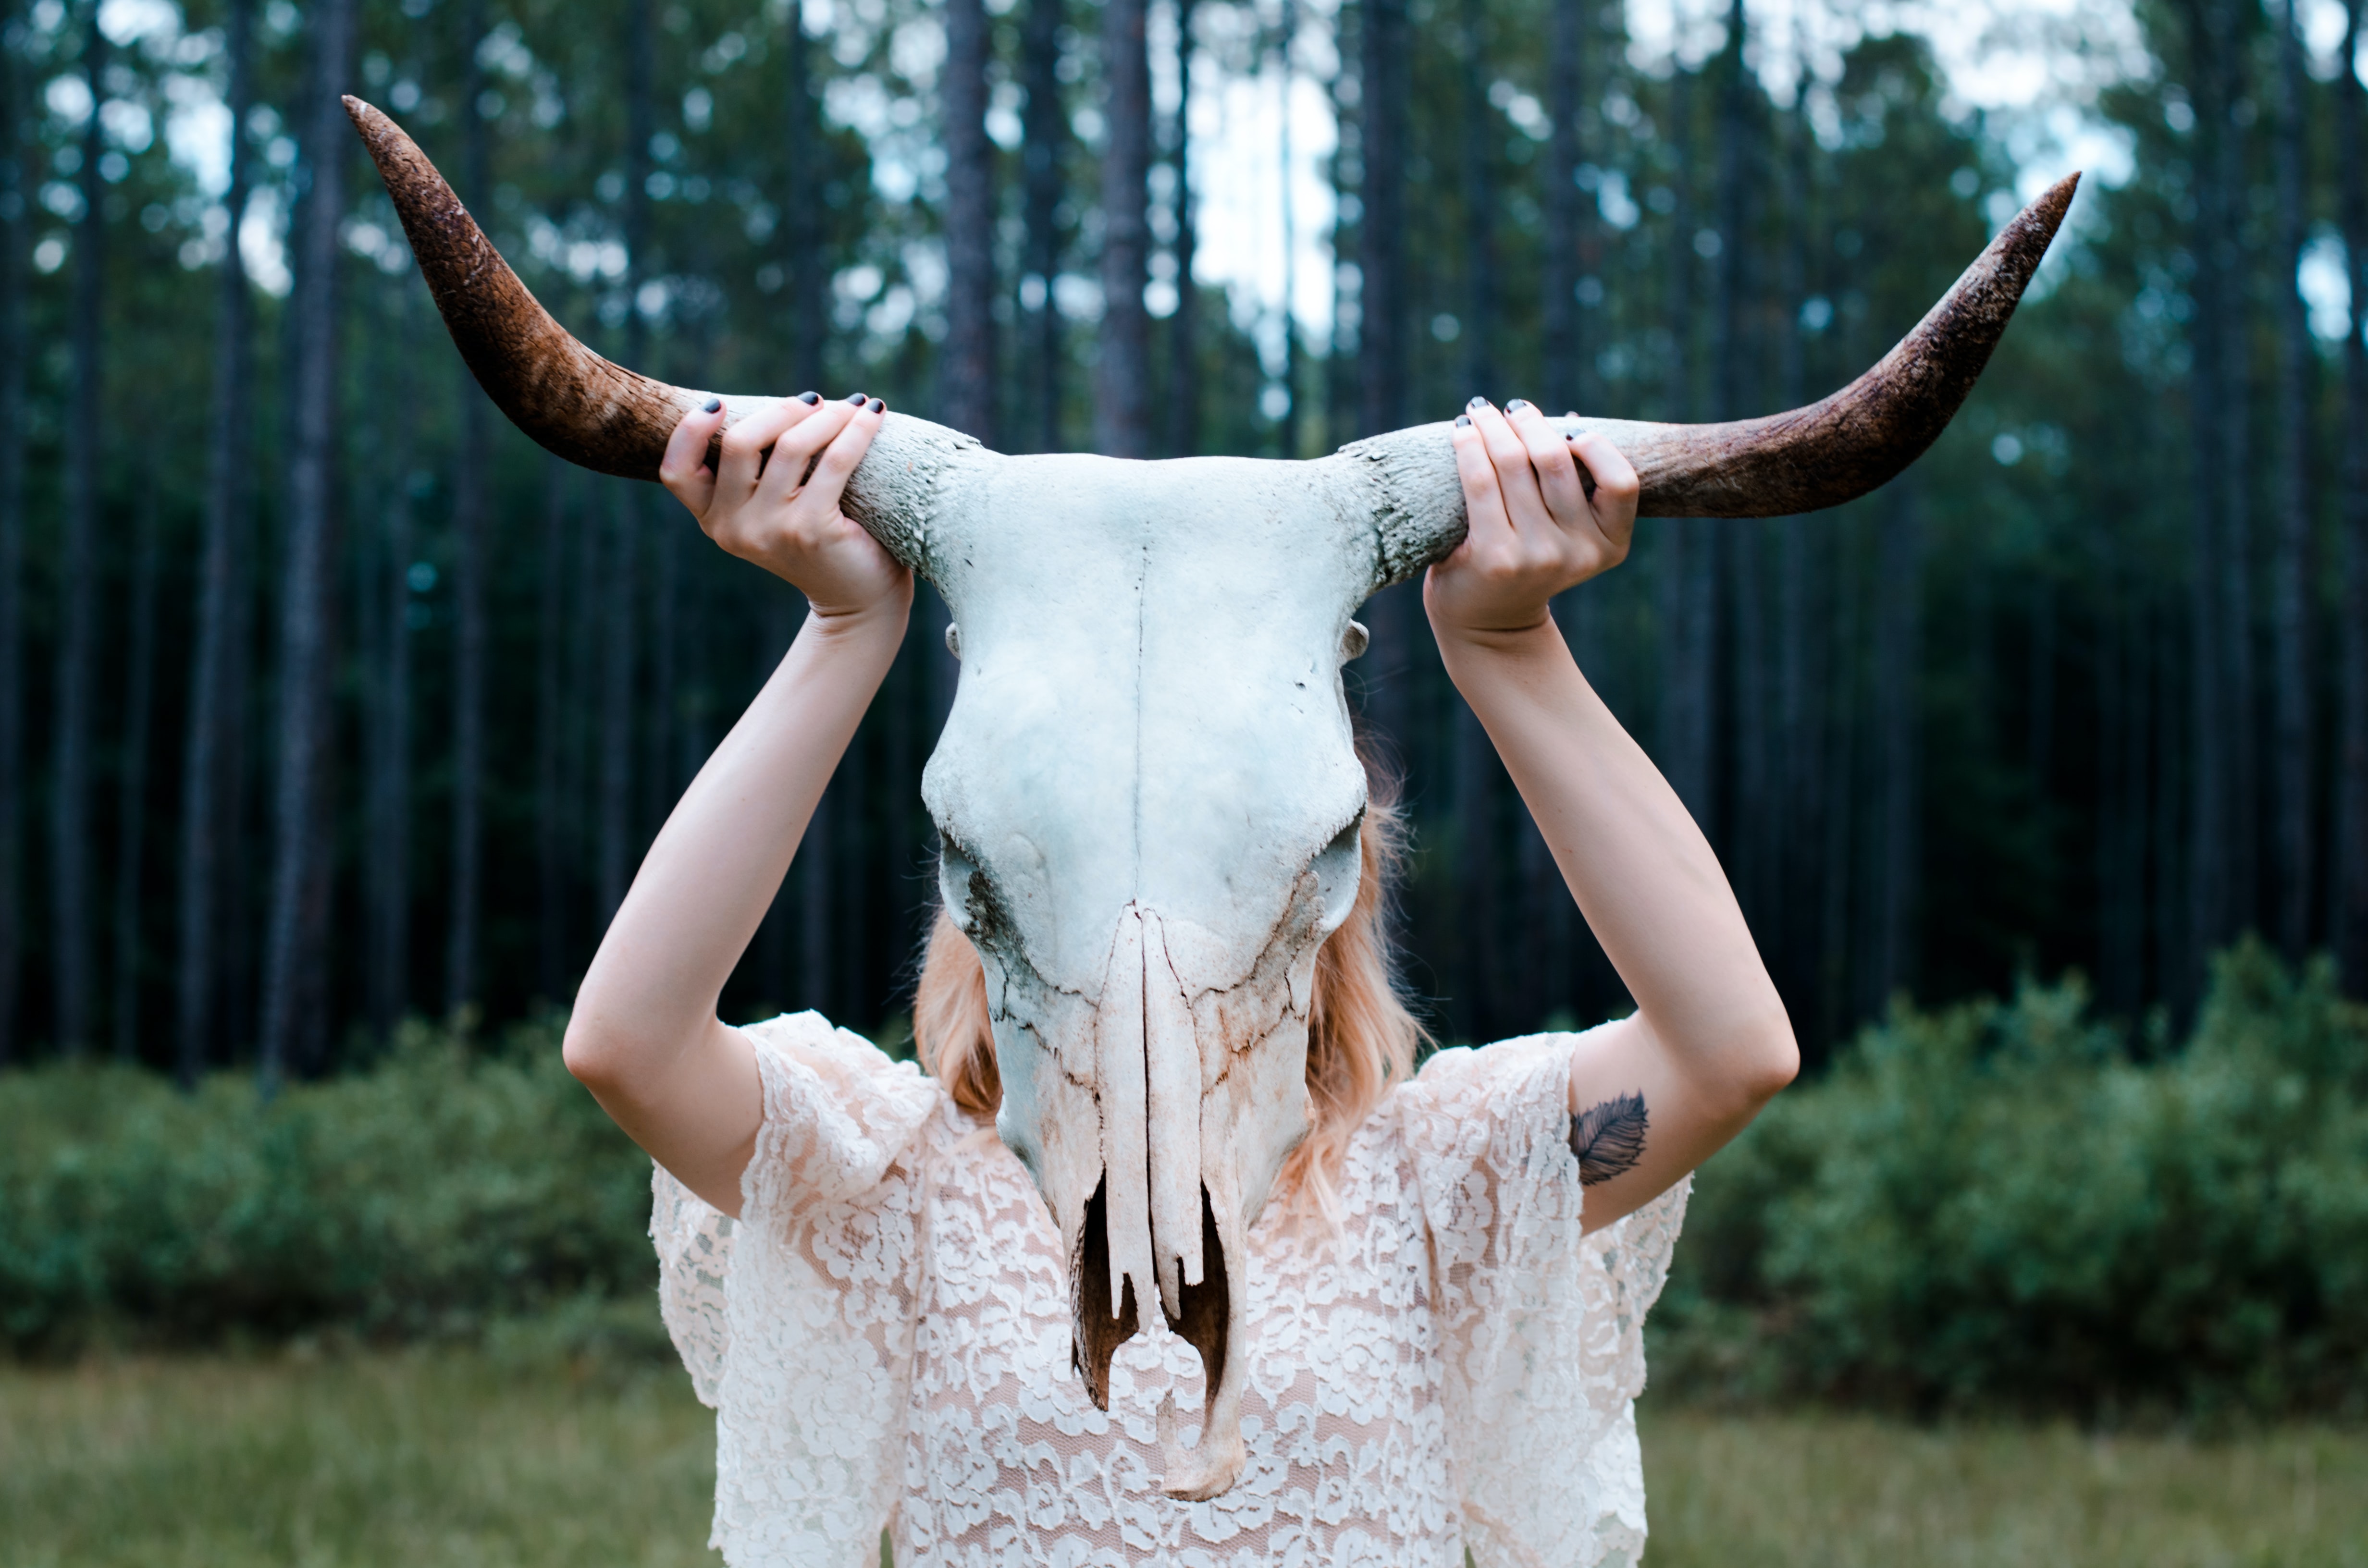 A woman dressed in white, standing in the woods and holding a skull of a cow with large horns